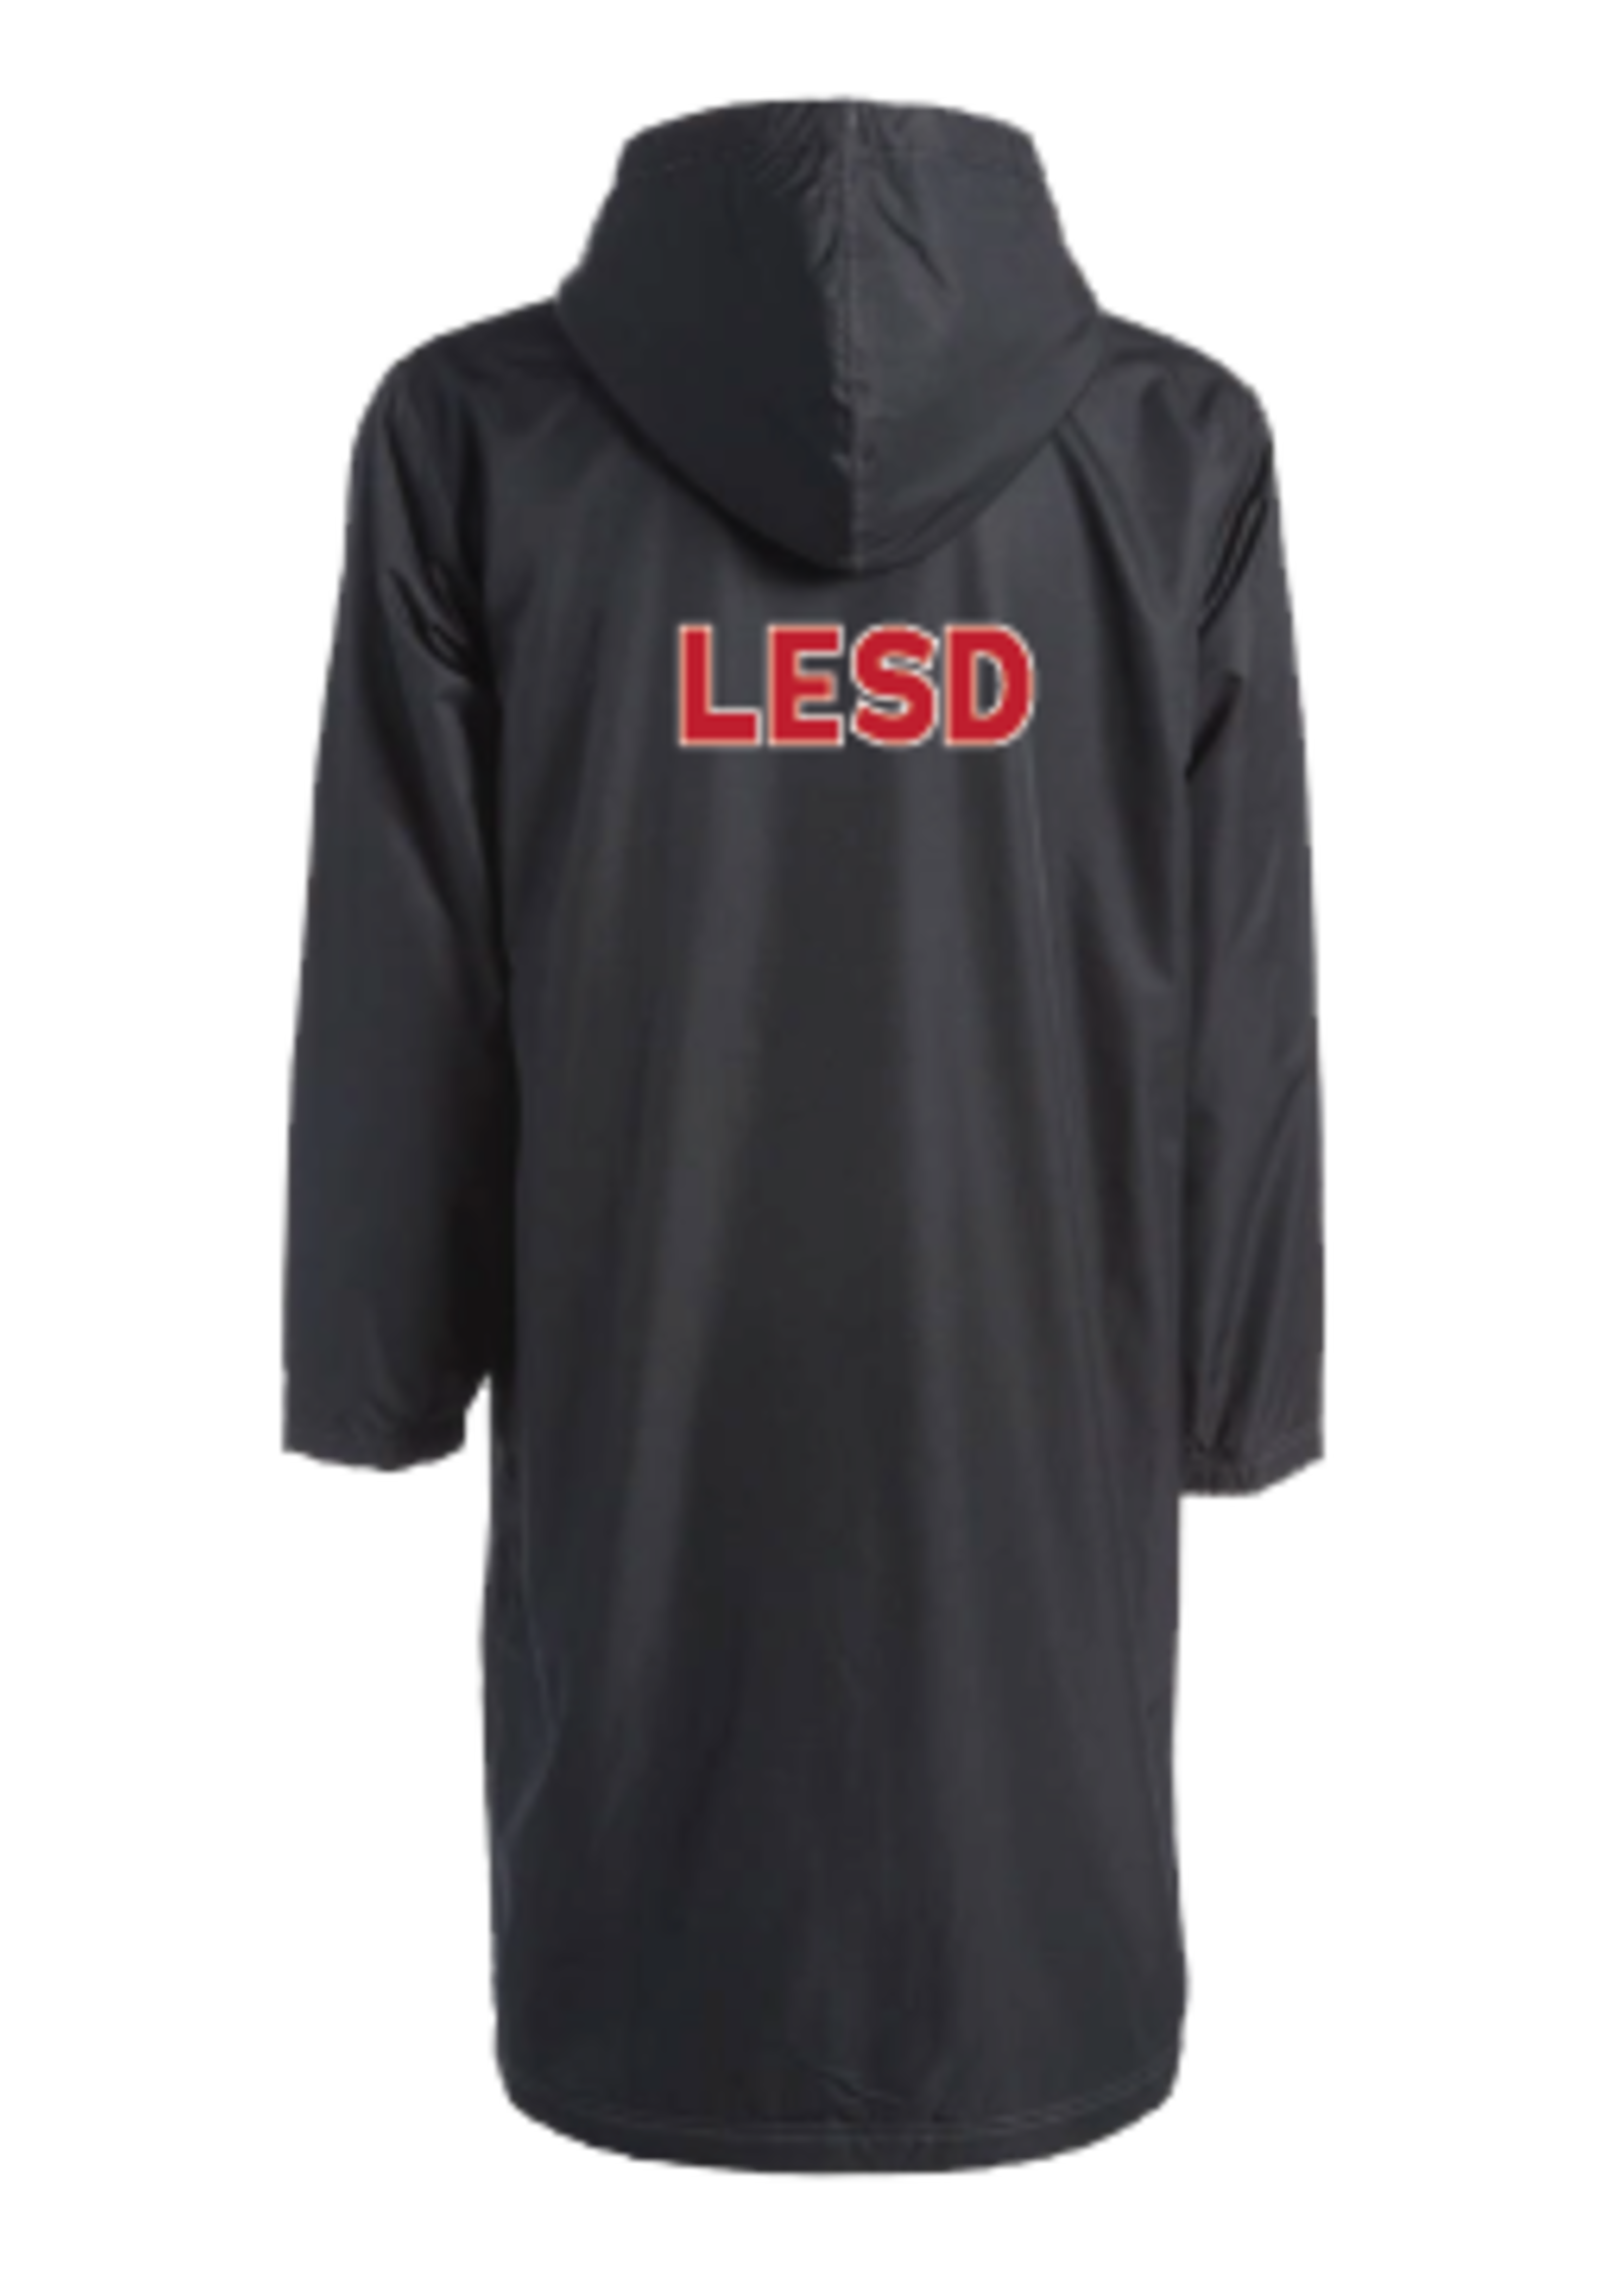 LESD Tackle Twill Letters